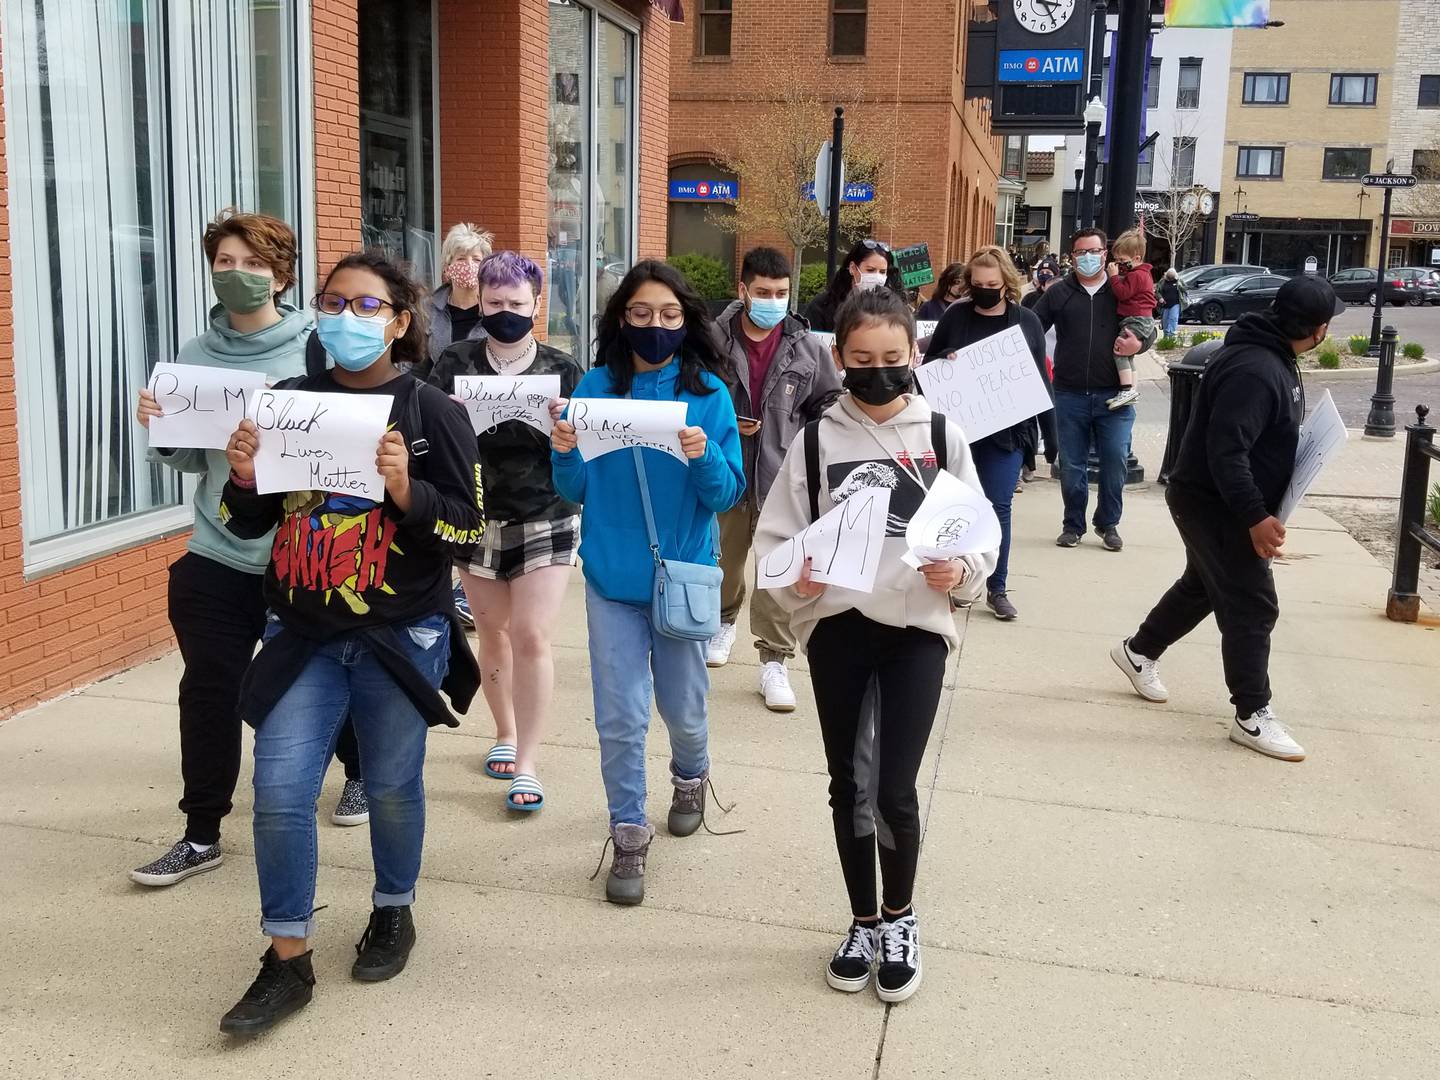 Alex Guzman, front left, was among about 40 people who marched around downtown Woodstock's Historic Square on Sunday, April 18, 2021, to protest violence by police officers against immigrants and indigenous people and people of color in the country.